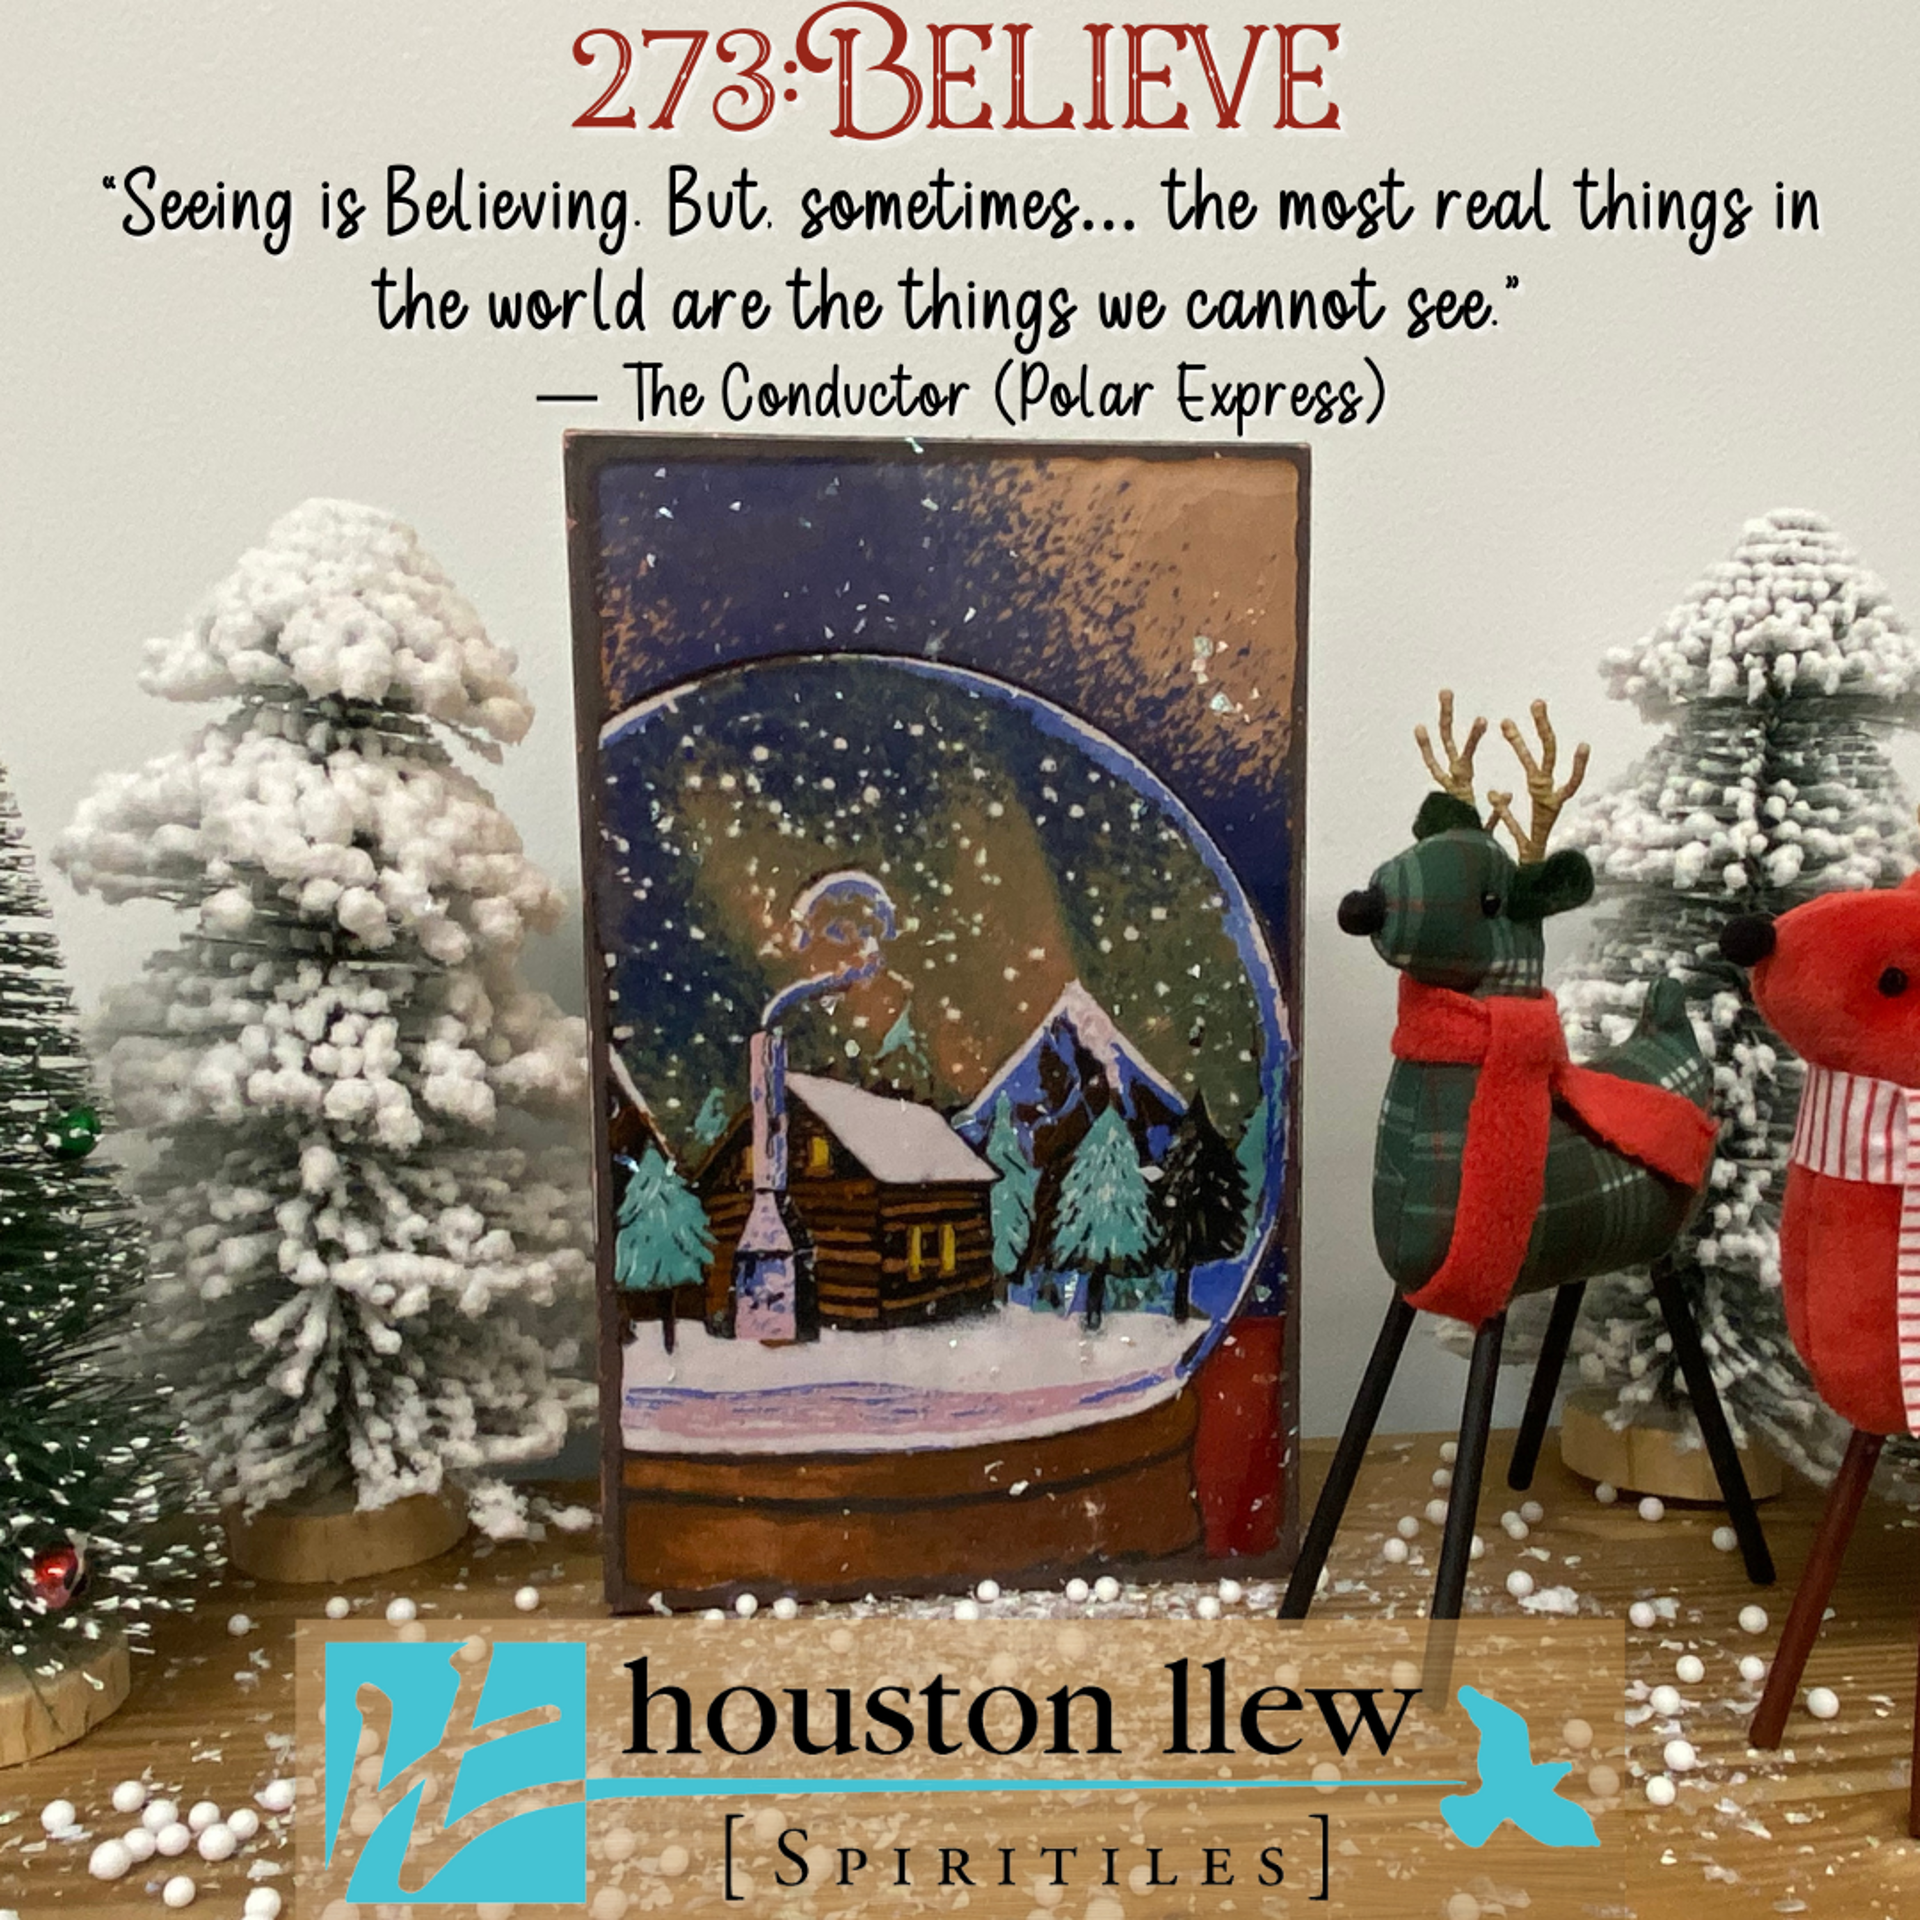 Believe - Retired - Limited Edition Christmas Spiritile “Seeing is Believing. But, sometimes… the most real things in the world are the things we cannot see.” -The Conductor (Polar Express) by Houston Llew